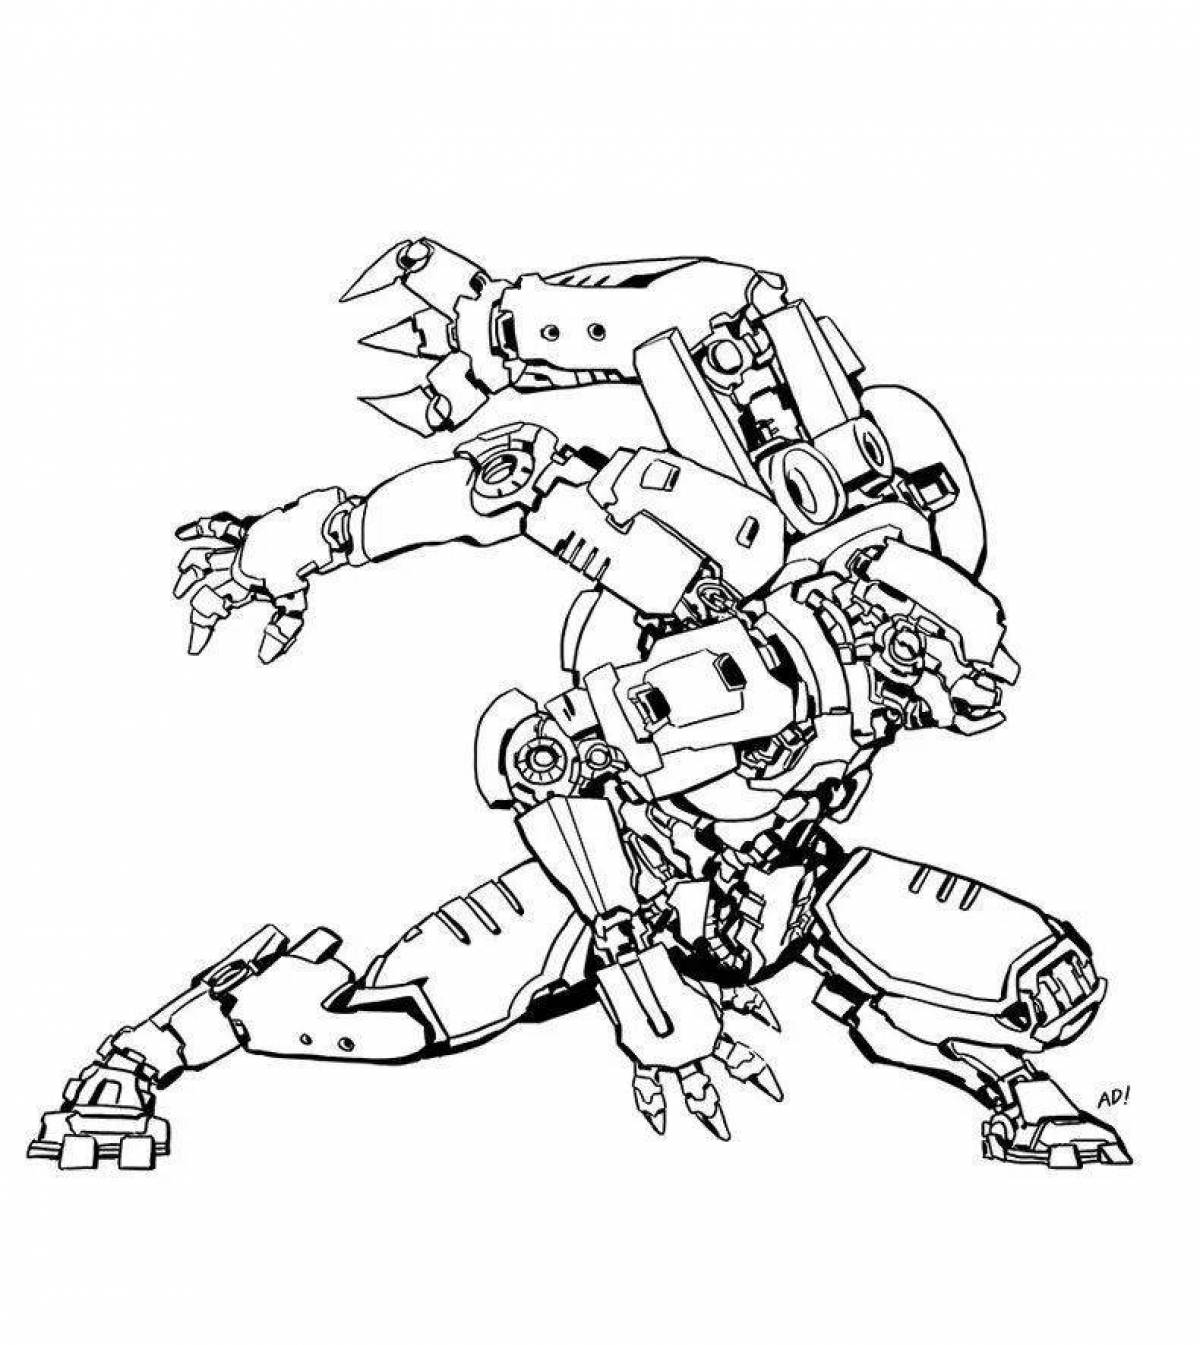 Fascinating pacific rim coloring page